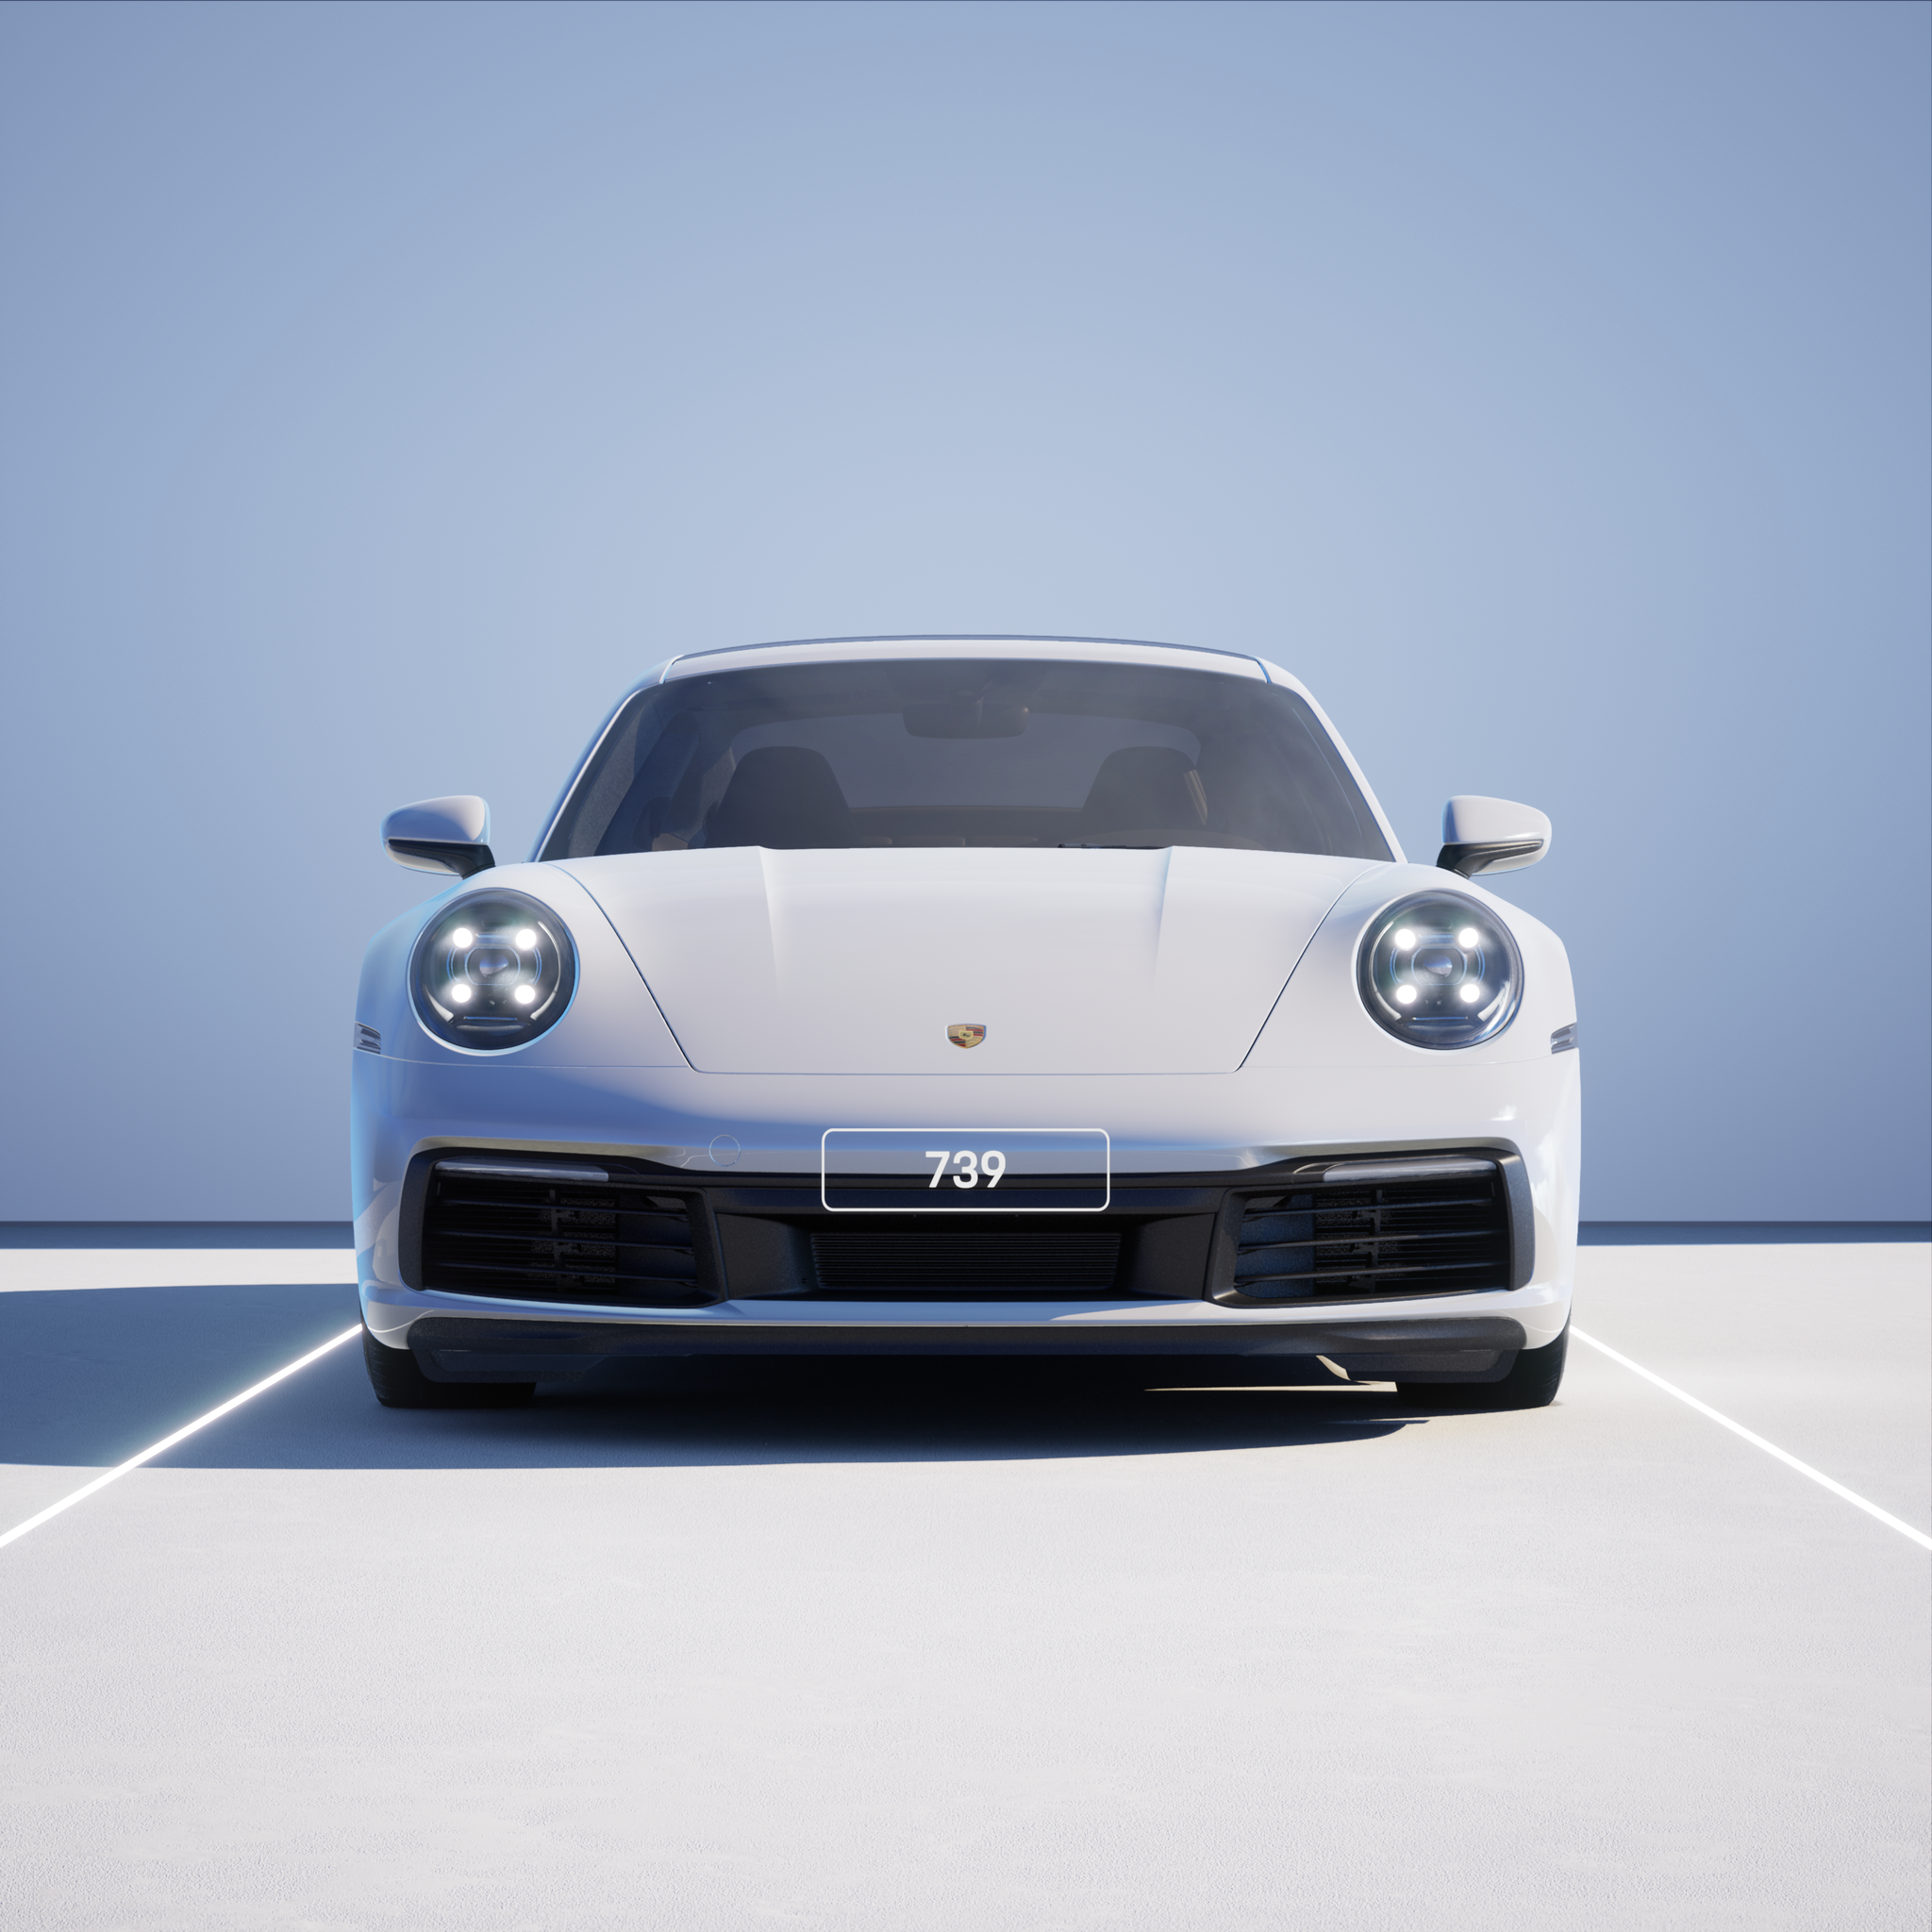 The PORSCHΞ 911 739 image in phase